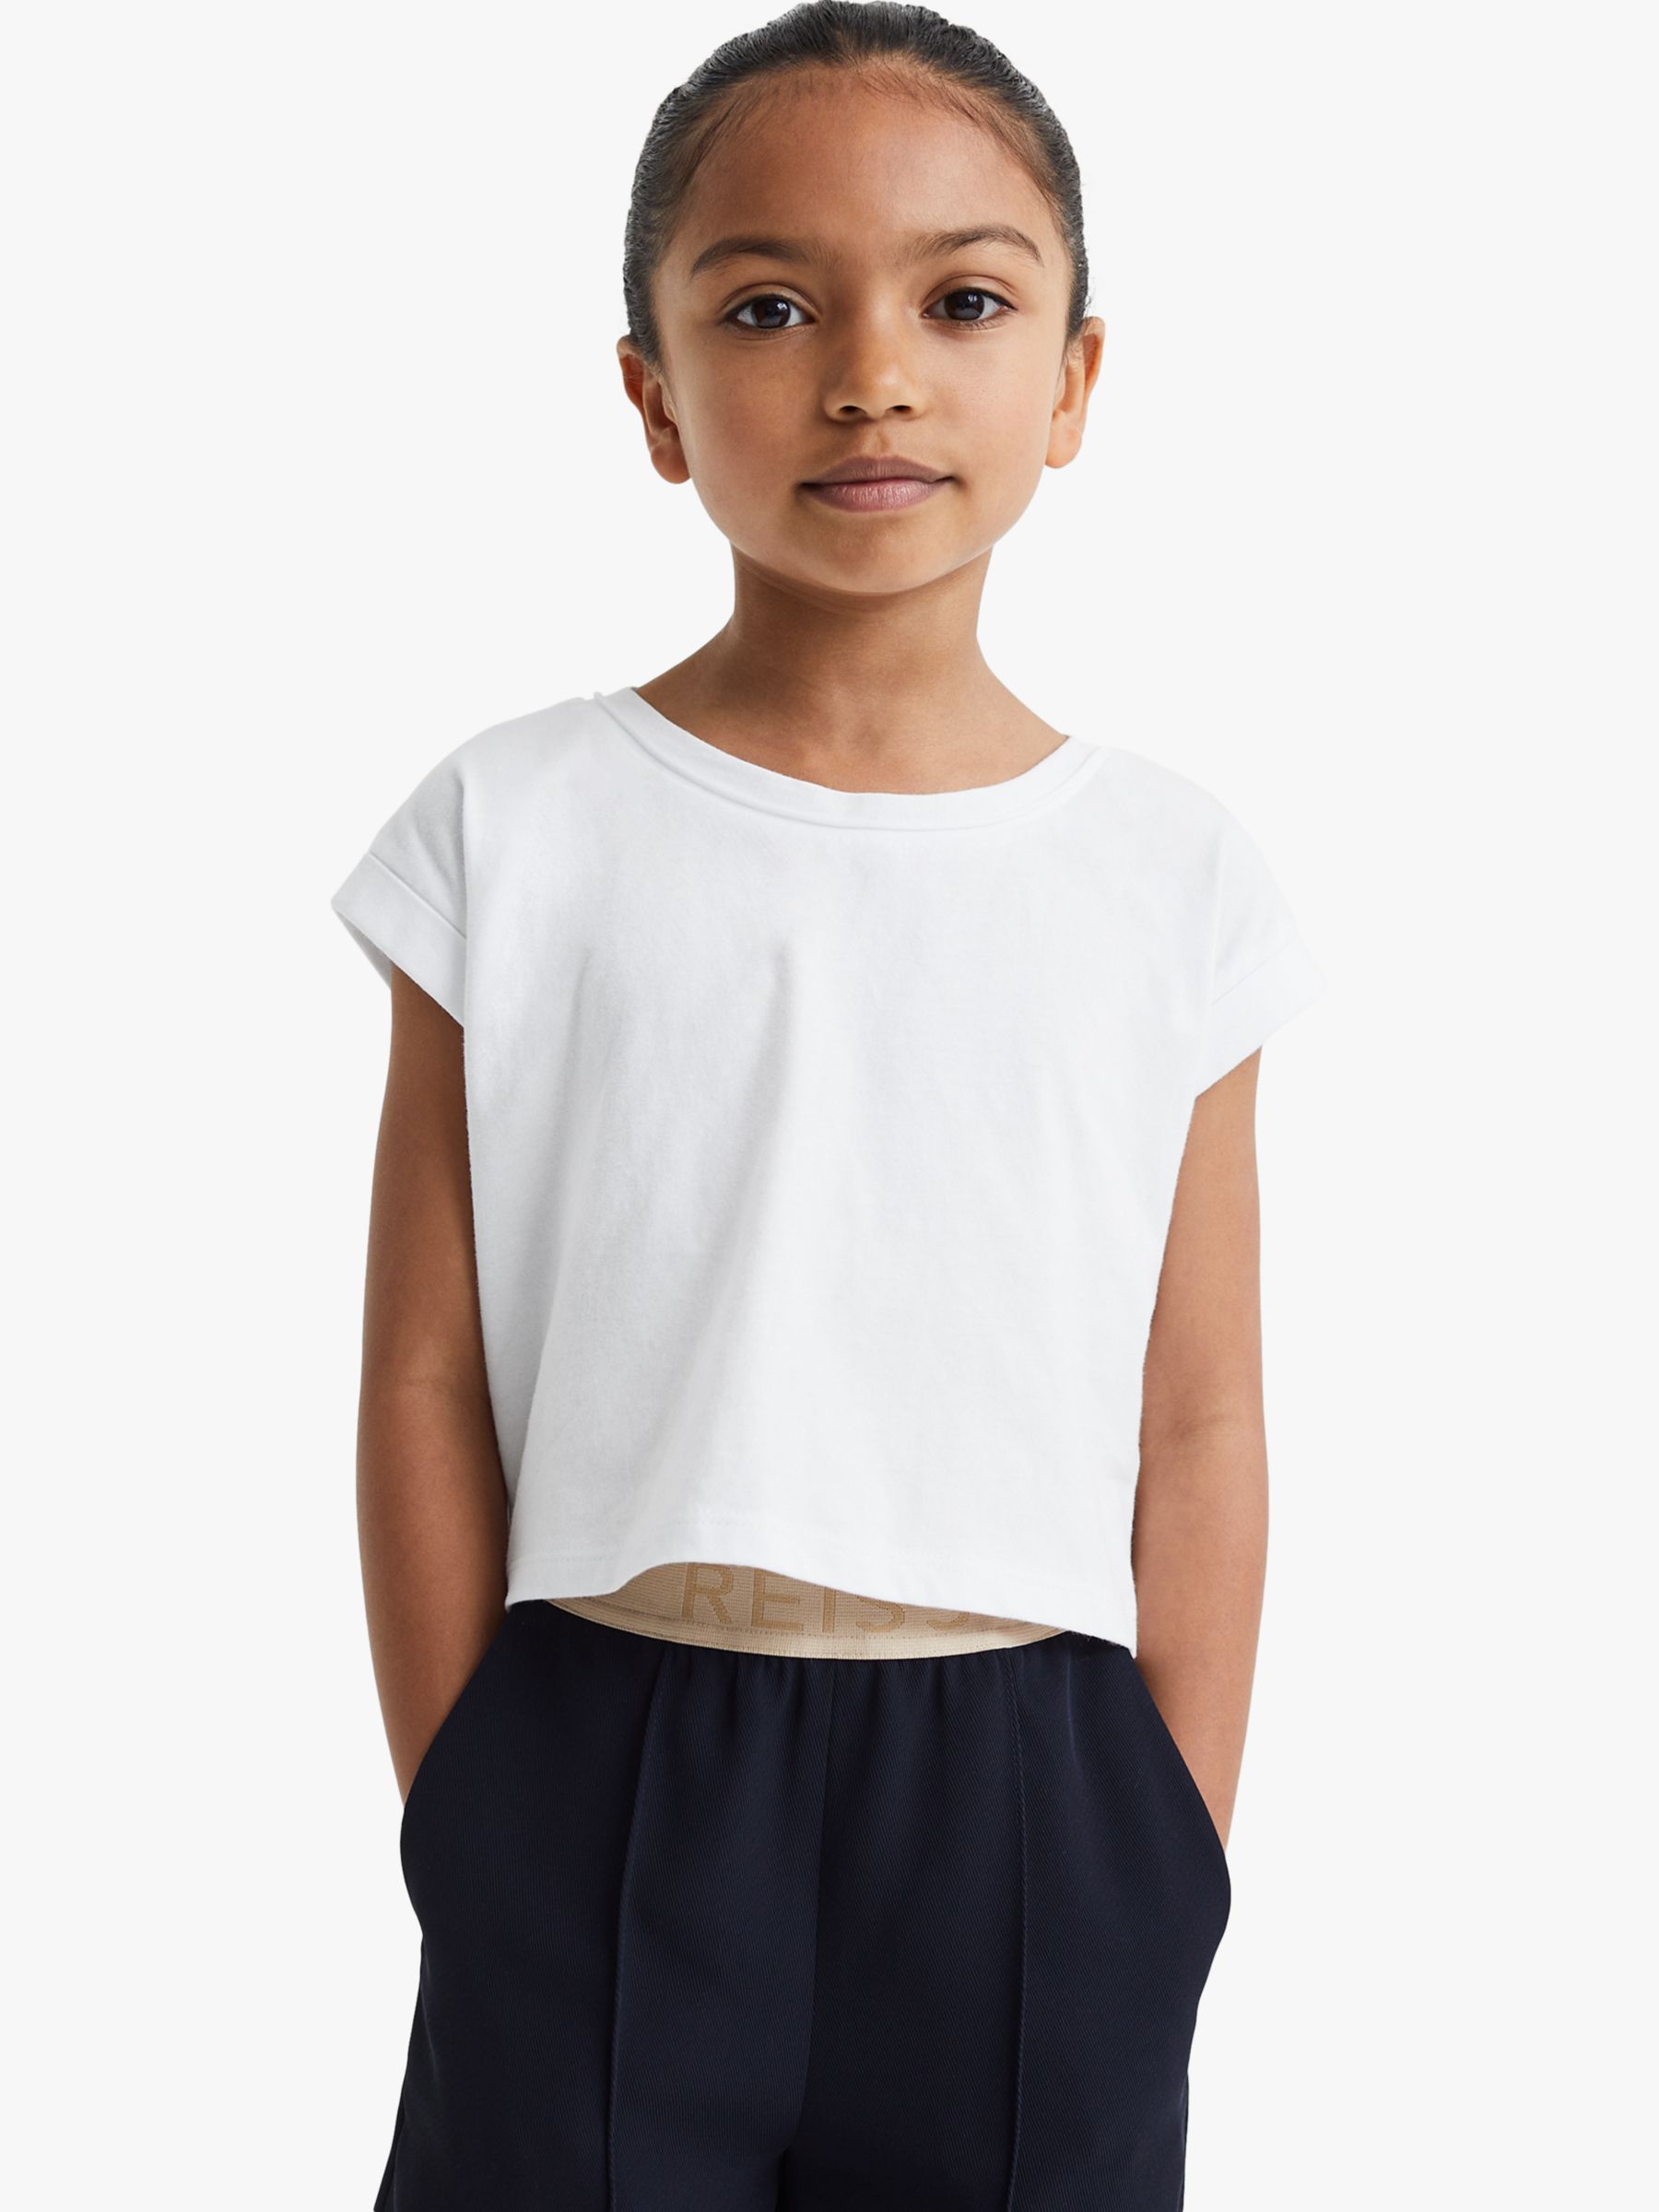 Buy Reiss Kids' Terry Cotton Cropped T-Shirt, White Online at johnlewis.com